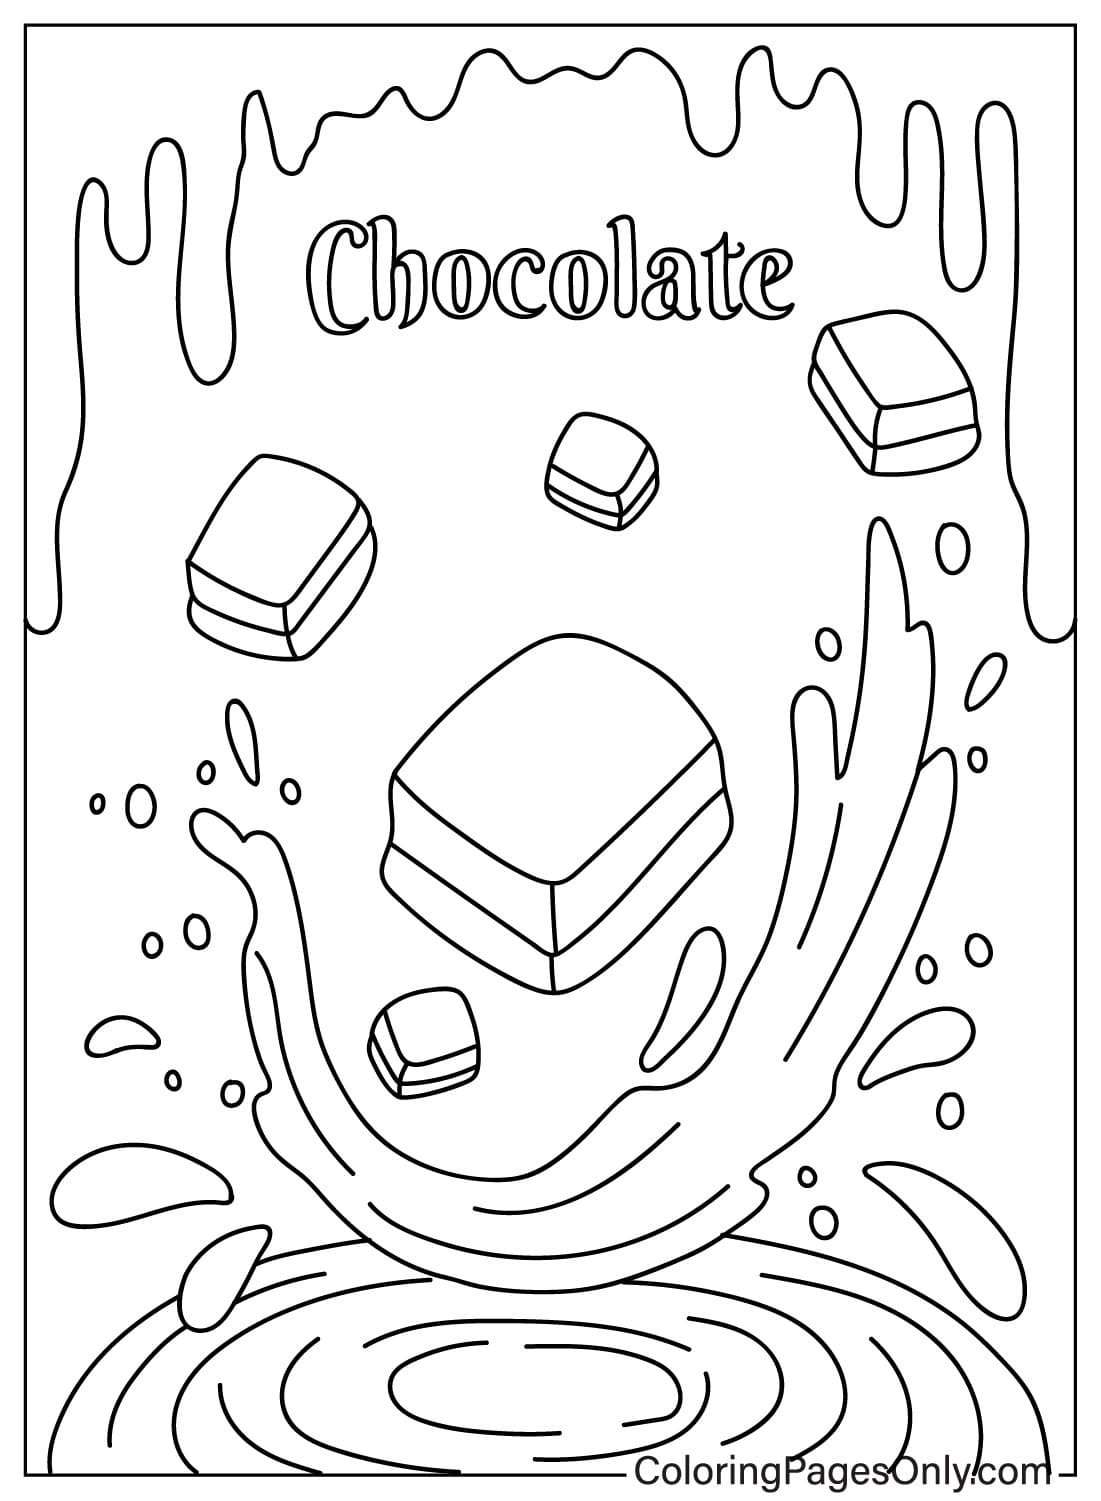 Chocolate Free Coloring Page from Chocolate